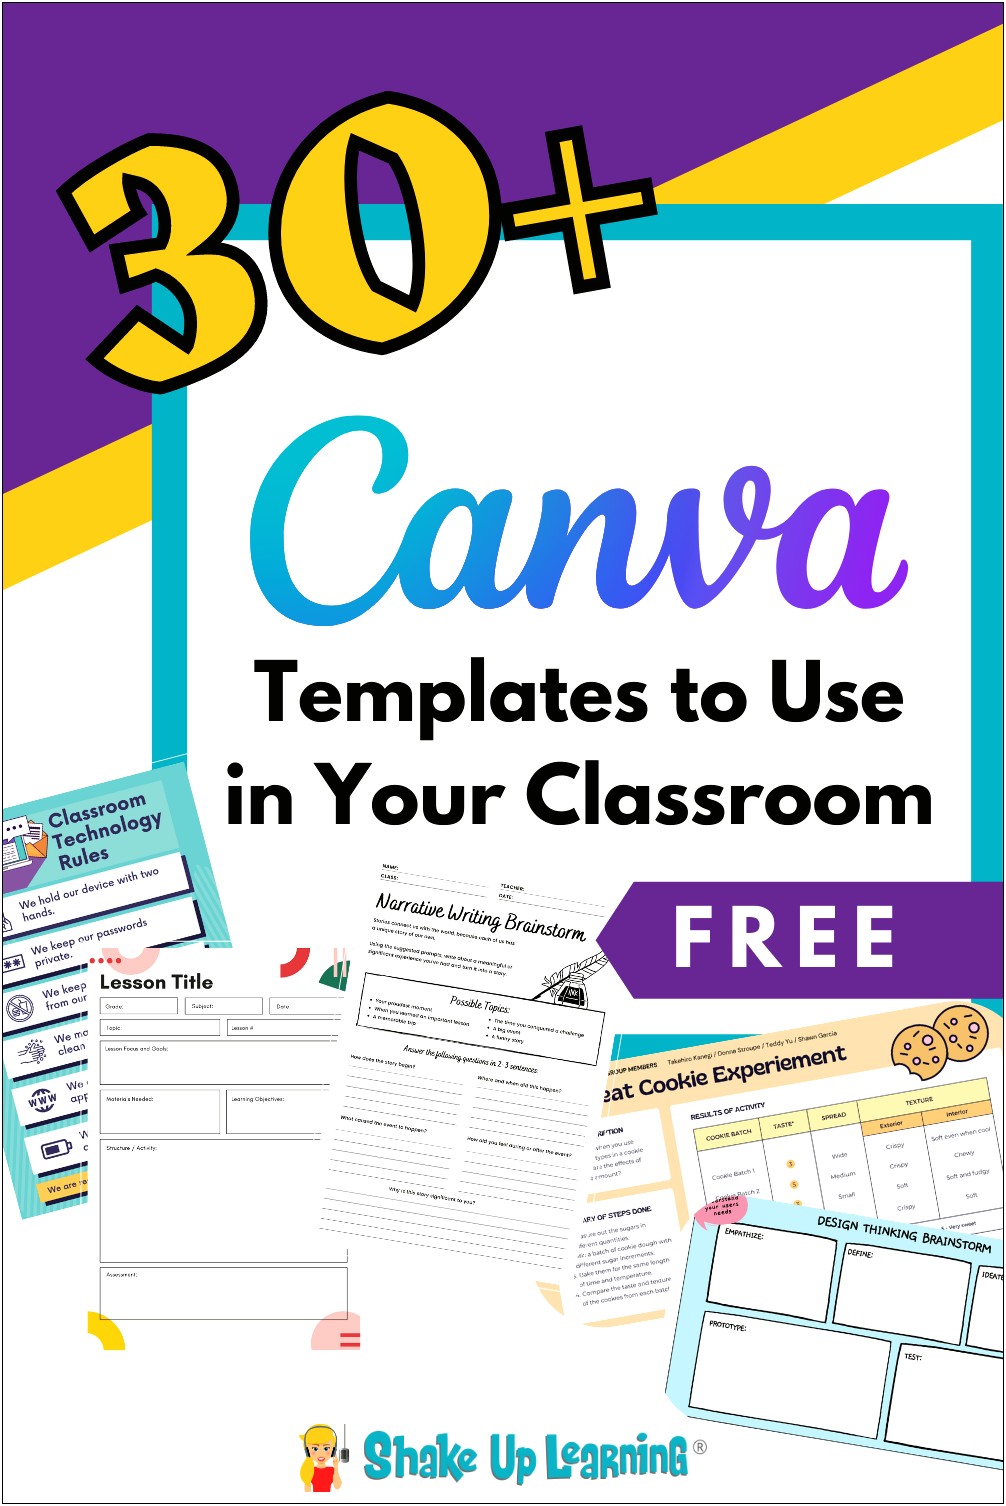 Free Lower Third Templates For Canva